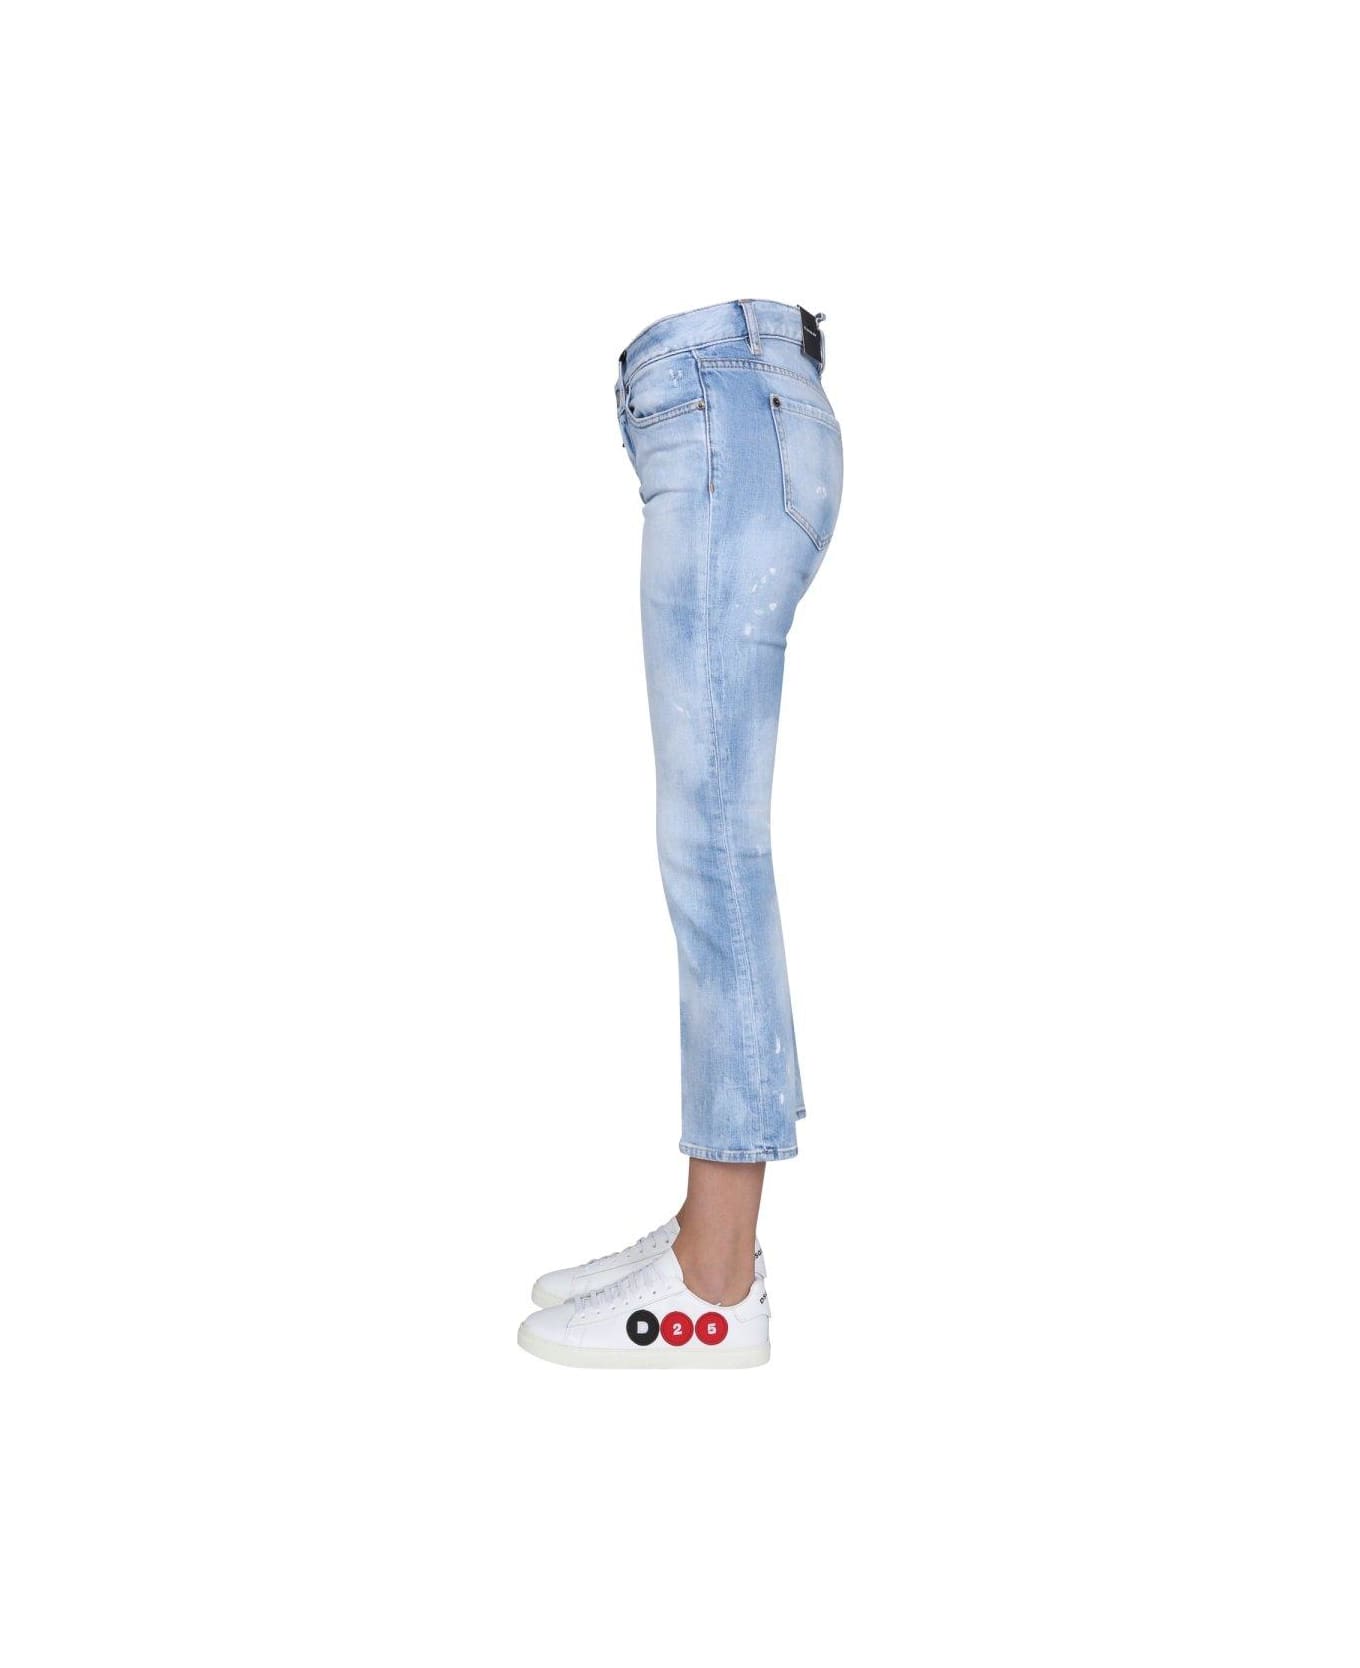 Dsquared2 Kick-flared Cropped Jeans - Navy blue